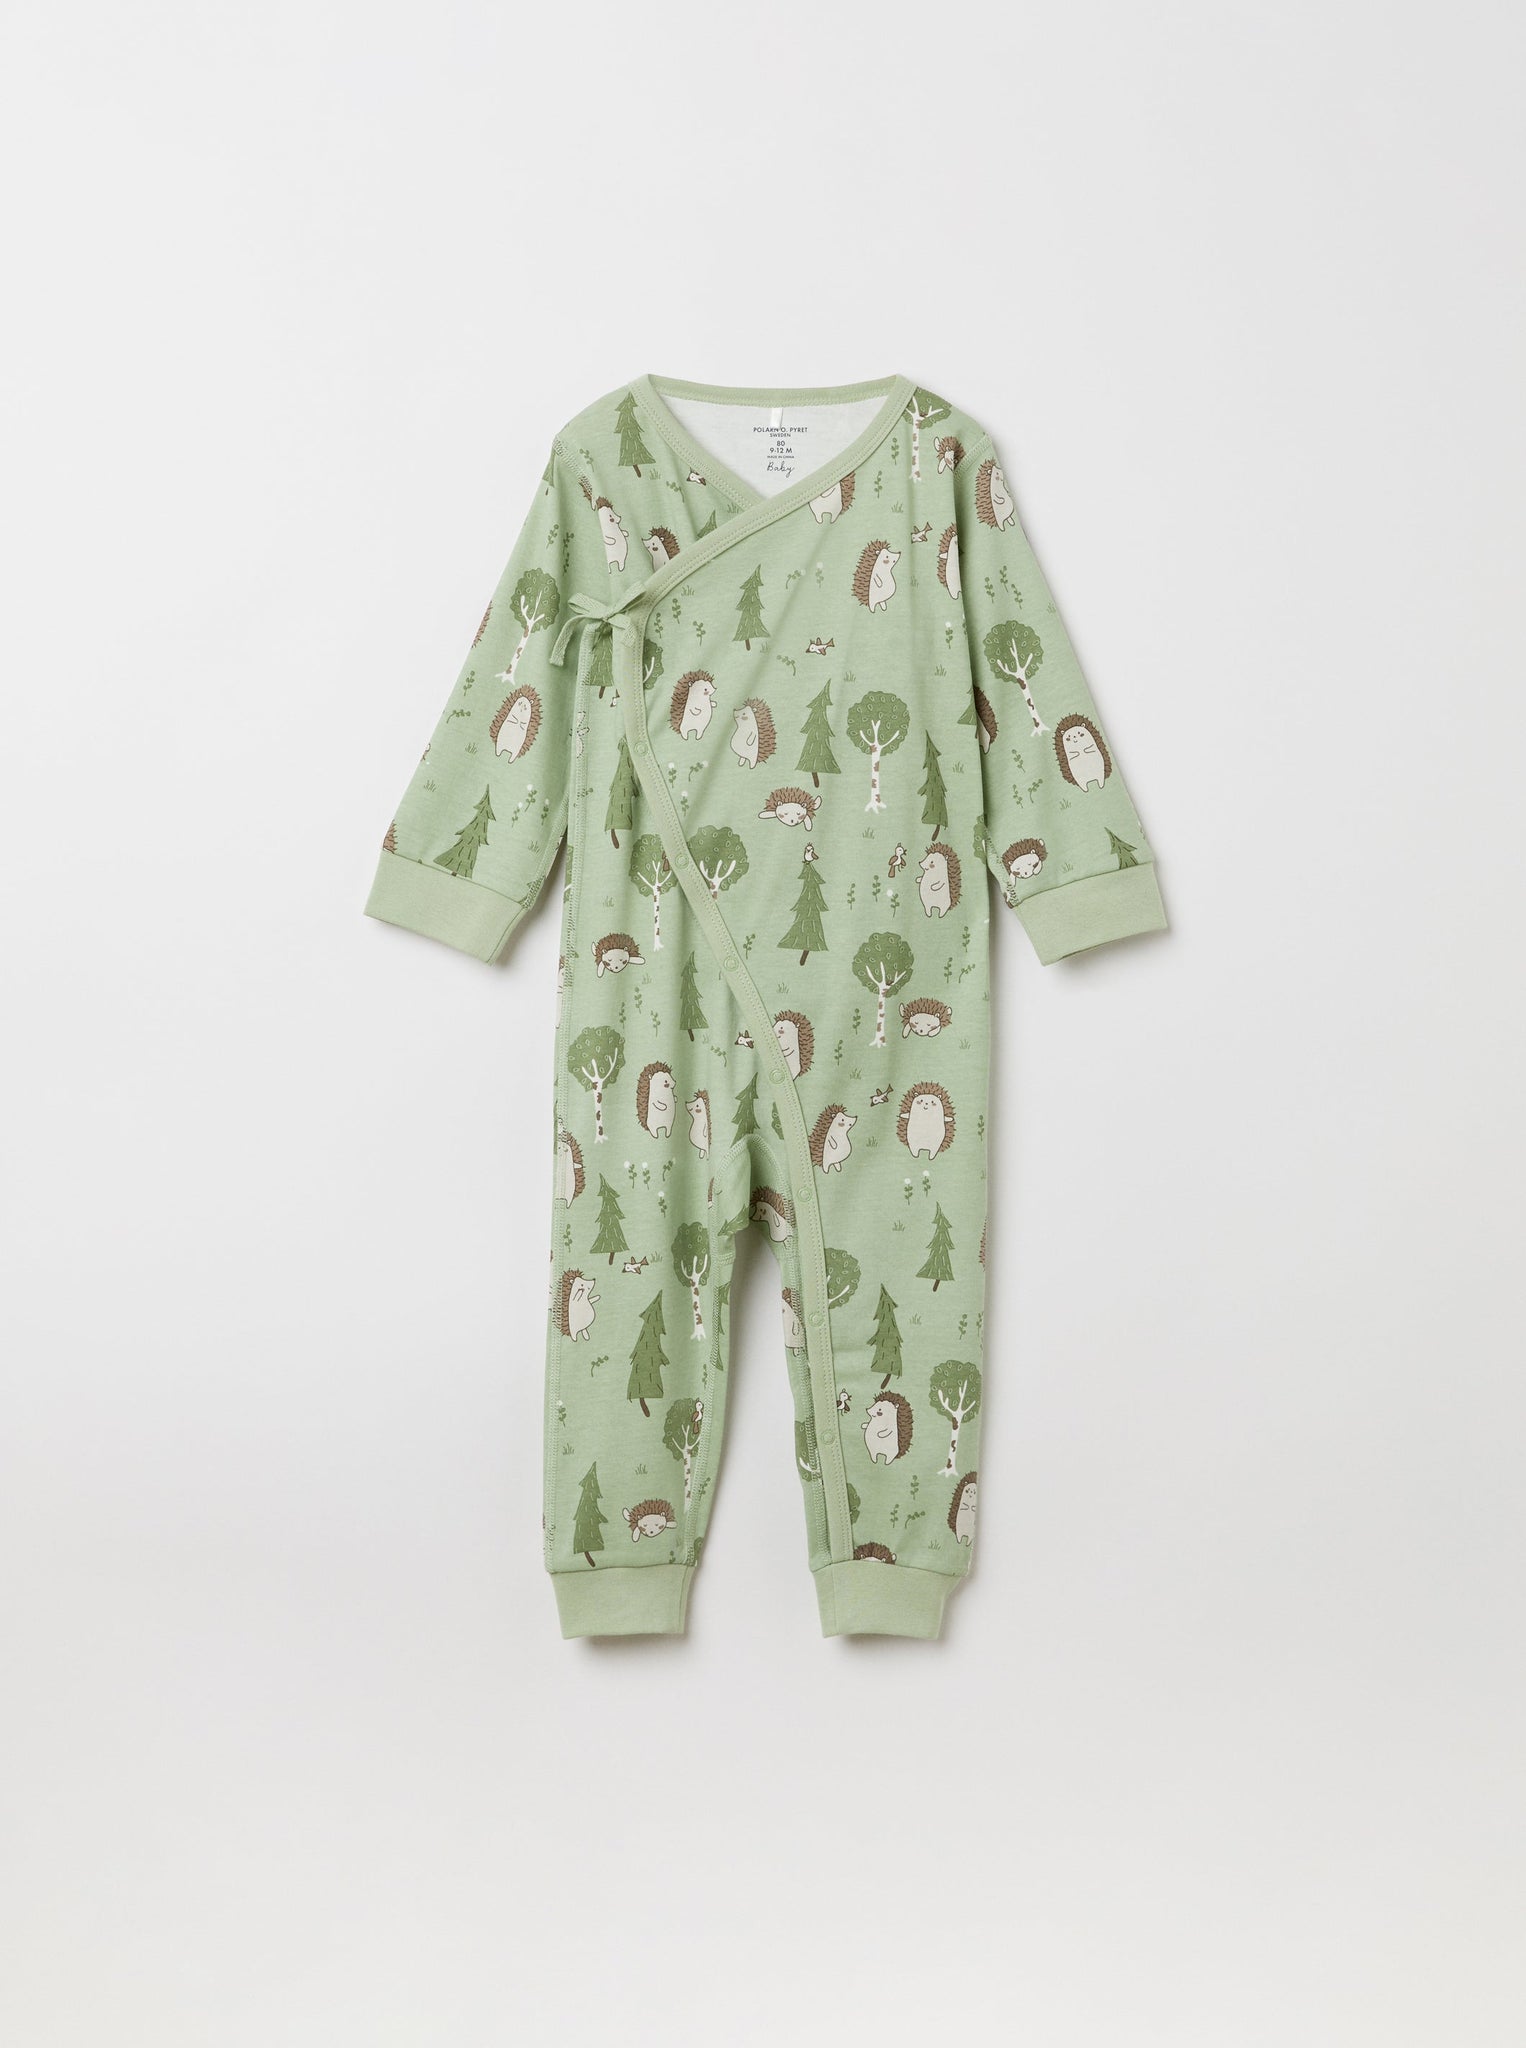 Hedgehog Organic Cotton Baby Romper from the Polarn O. Pyret babywear collection. Clothes made using sustainably sourced materials.